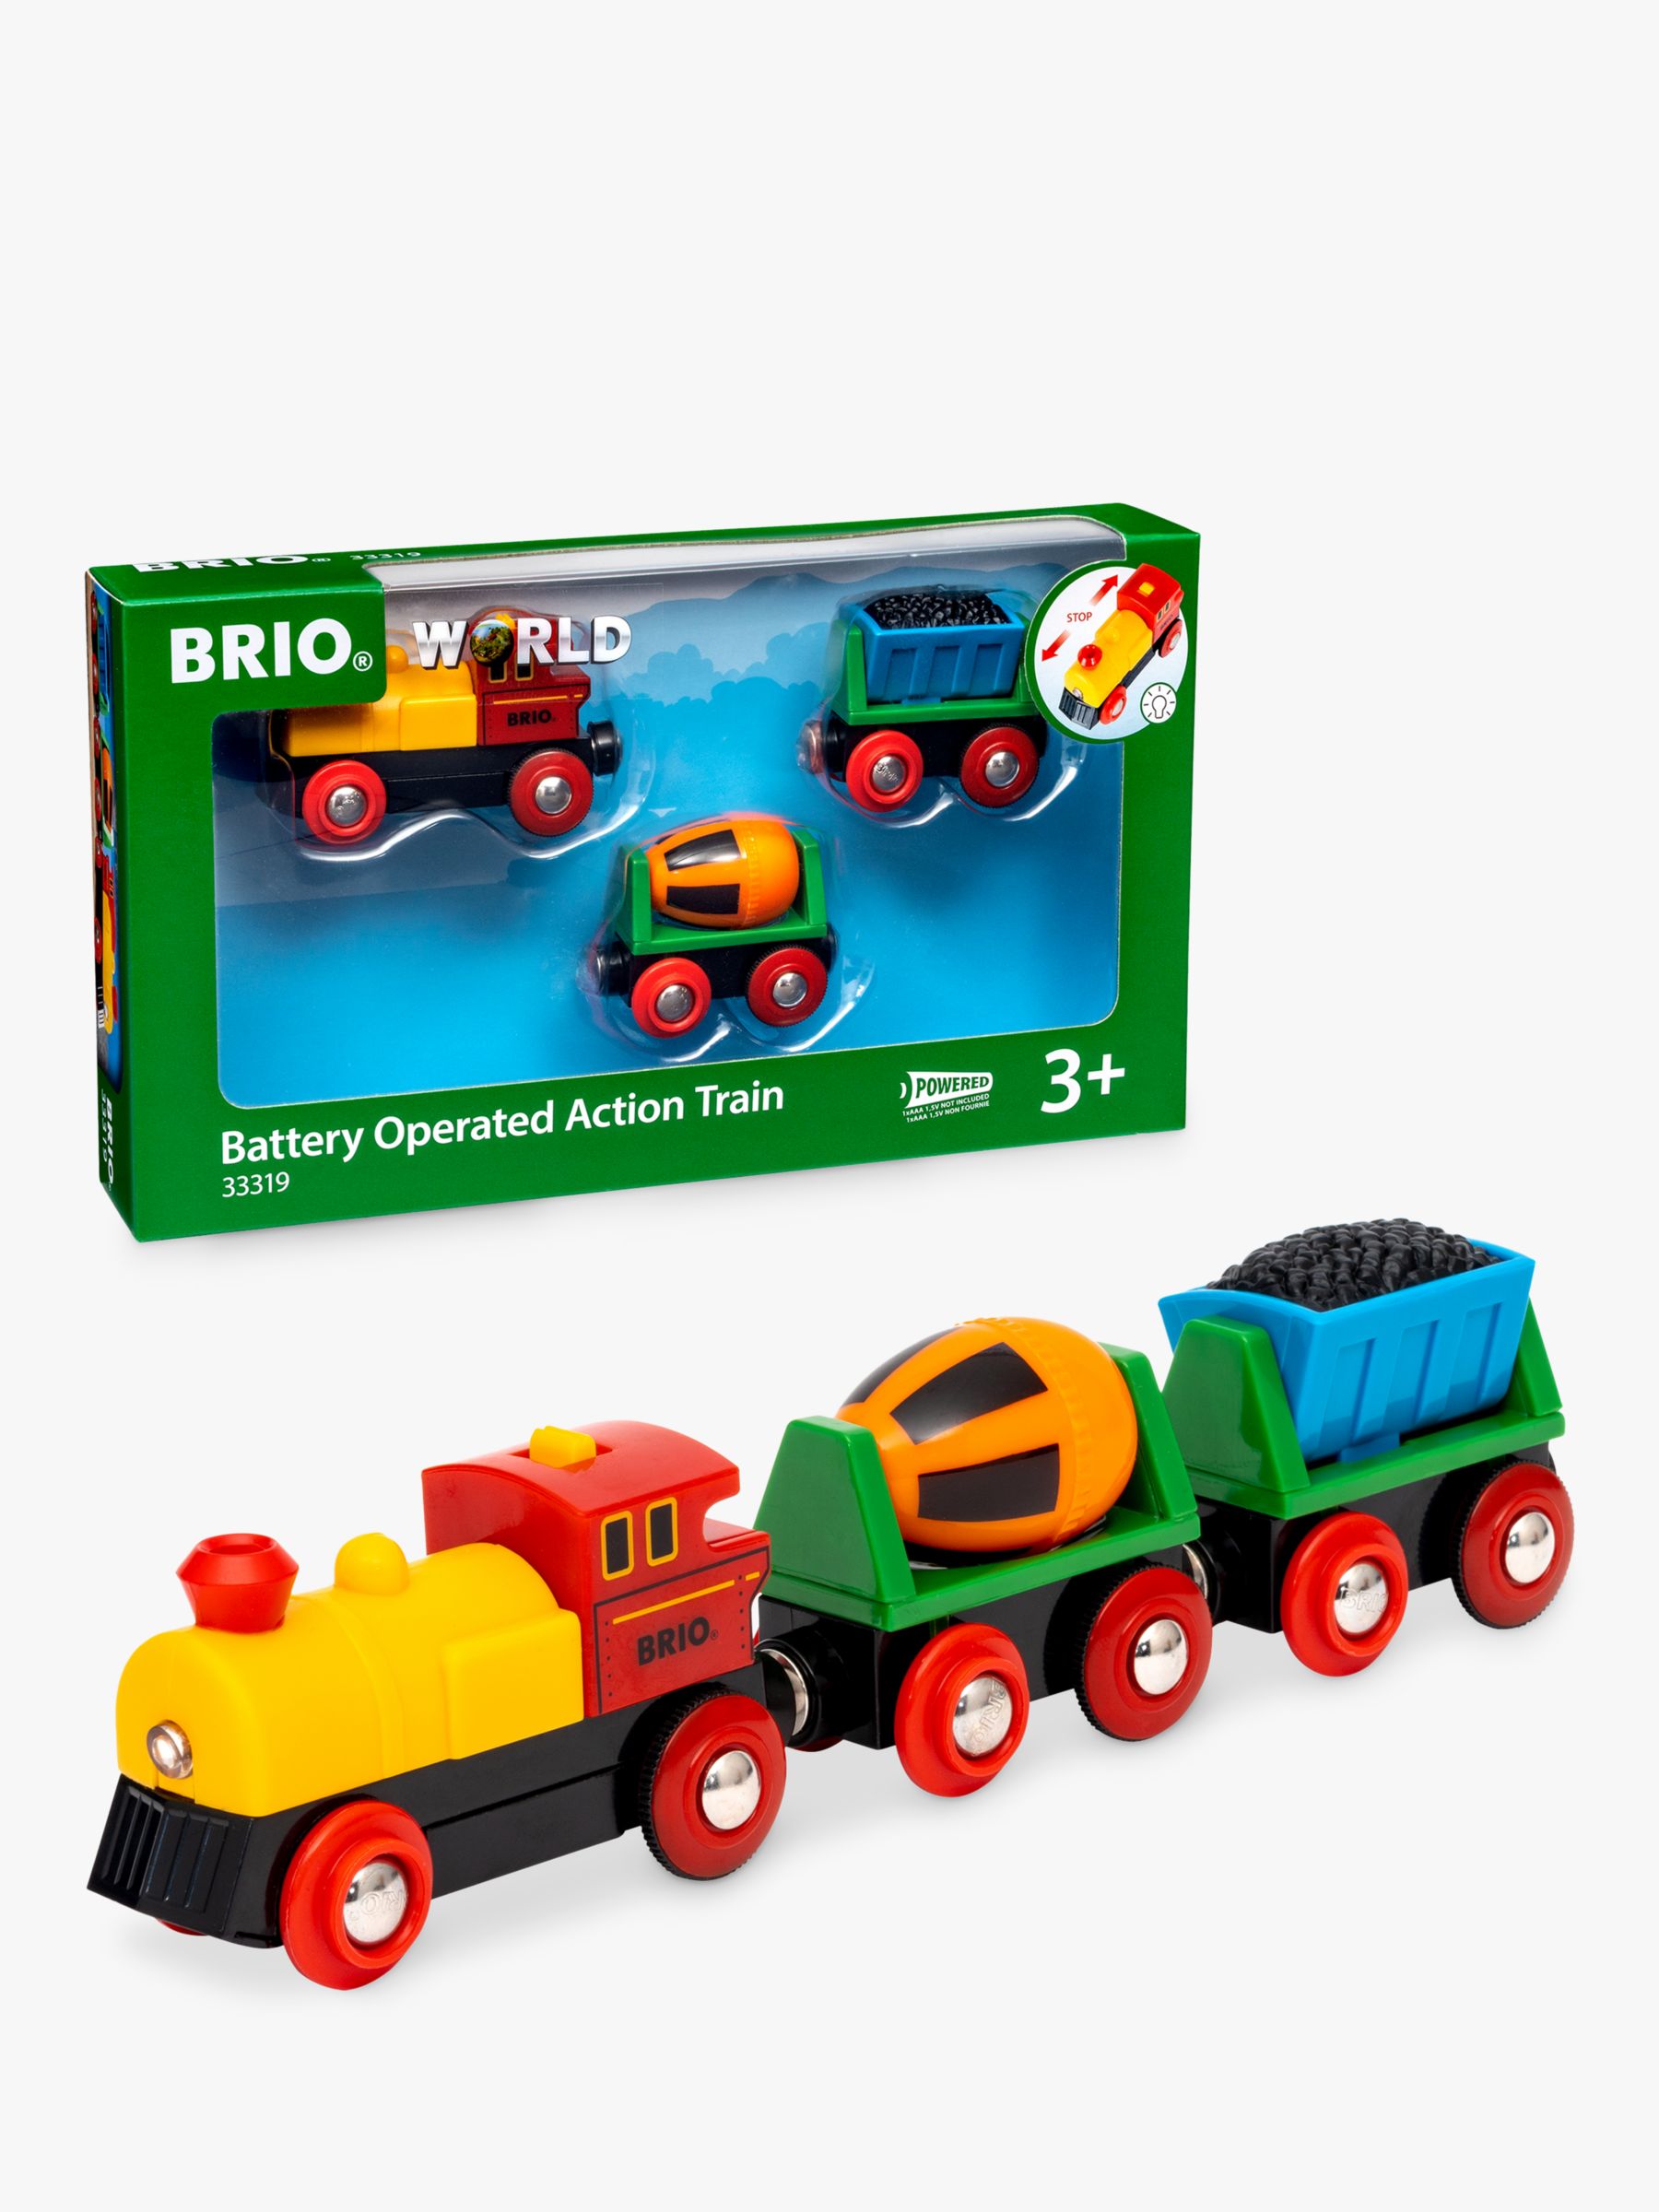  Brio Classic – 65th Anniversary Train Set  32 Piece Wooden  Train Set Toy for Kids Age 2 Years Up : Toys & Games